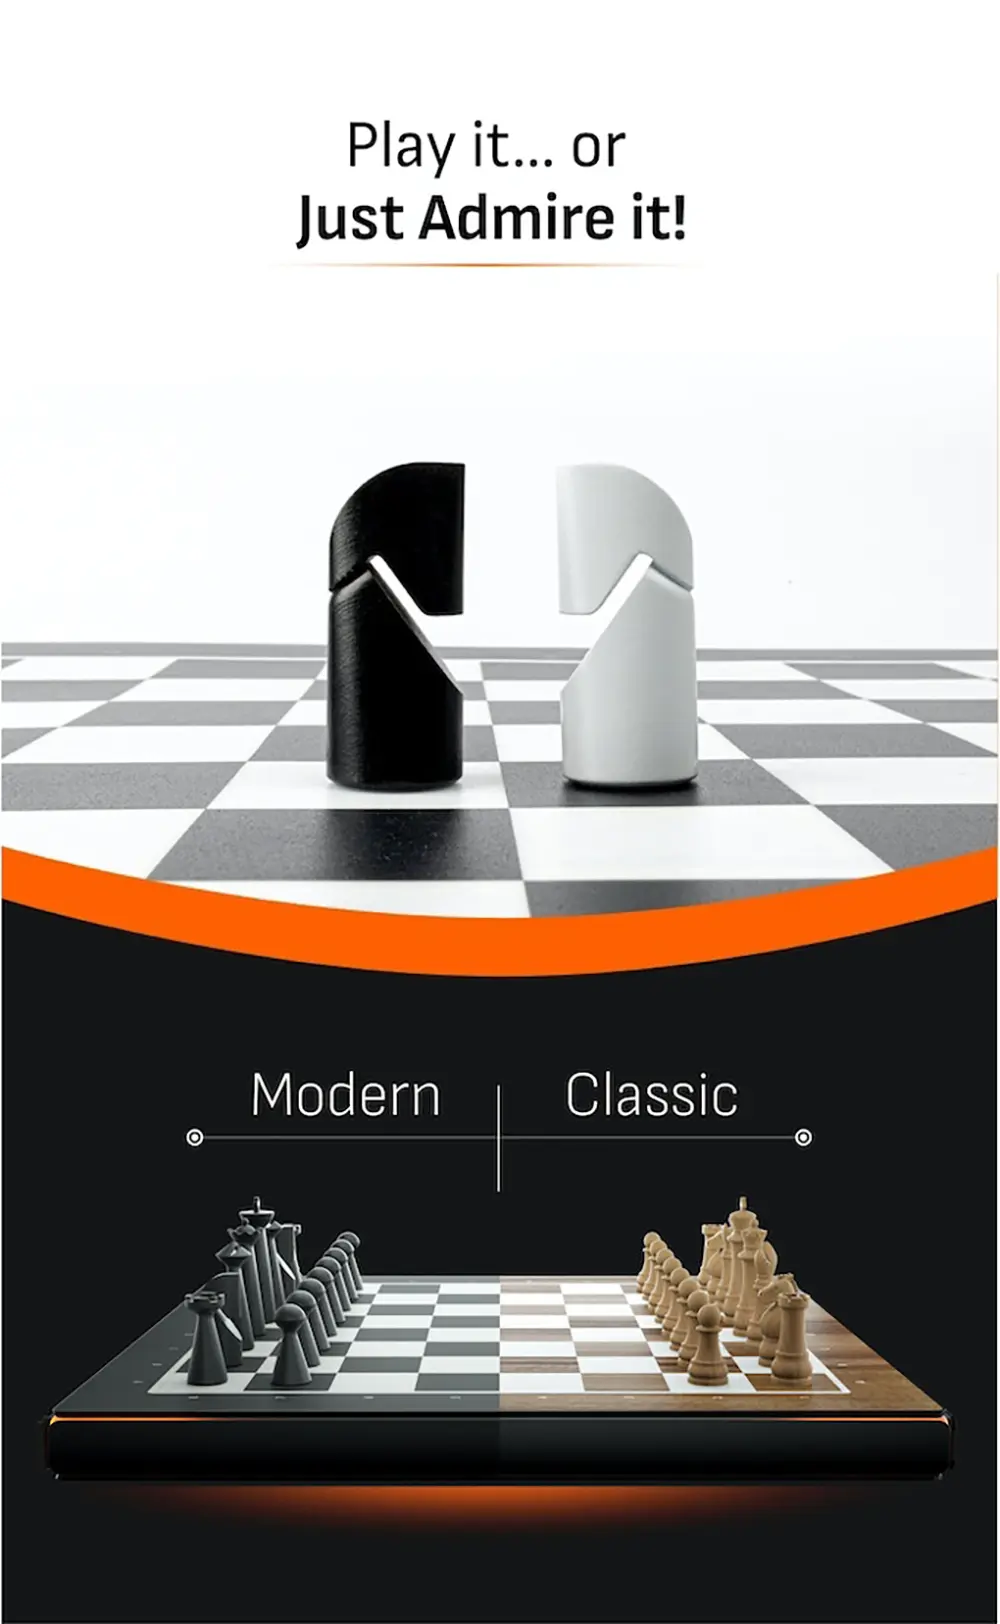 This chess board uses visual projectors to help you learn the game and  learn creating strategies! - Yanko Design